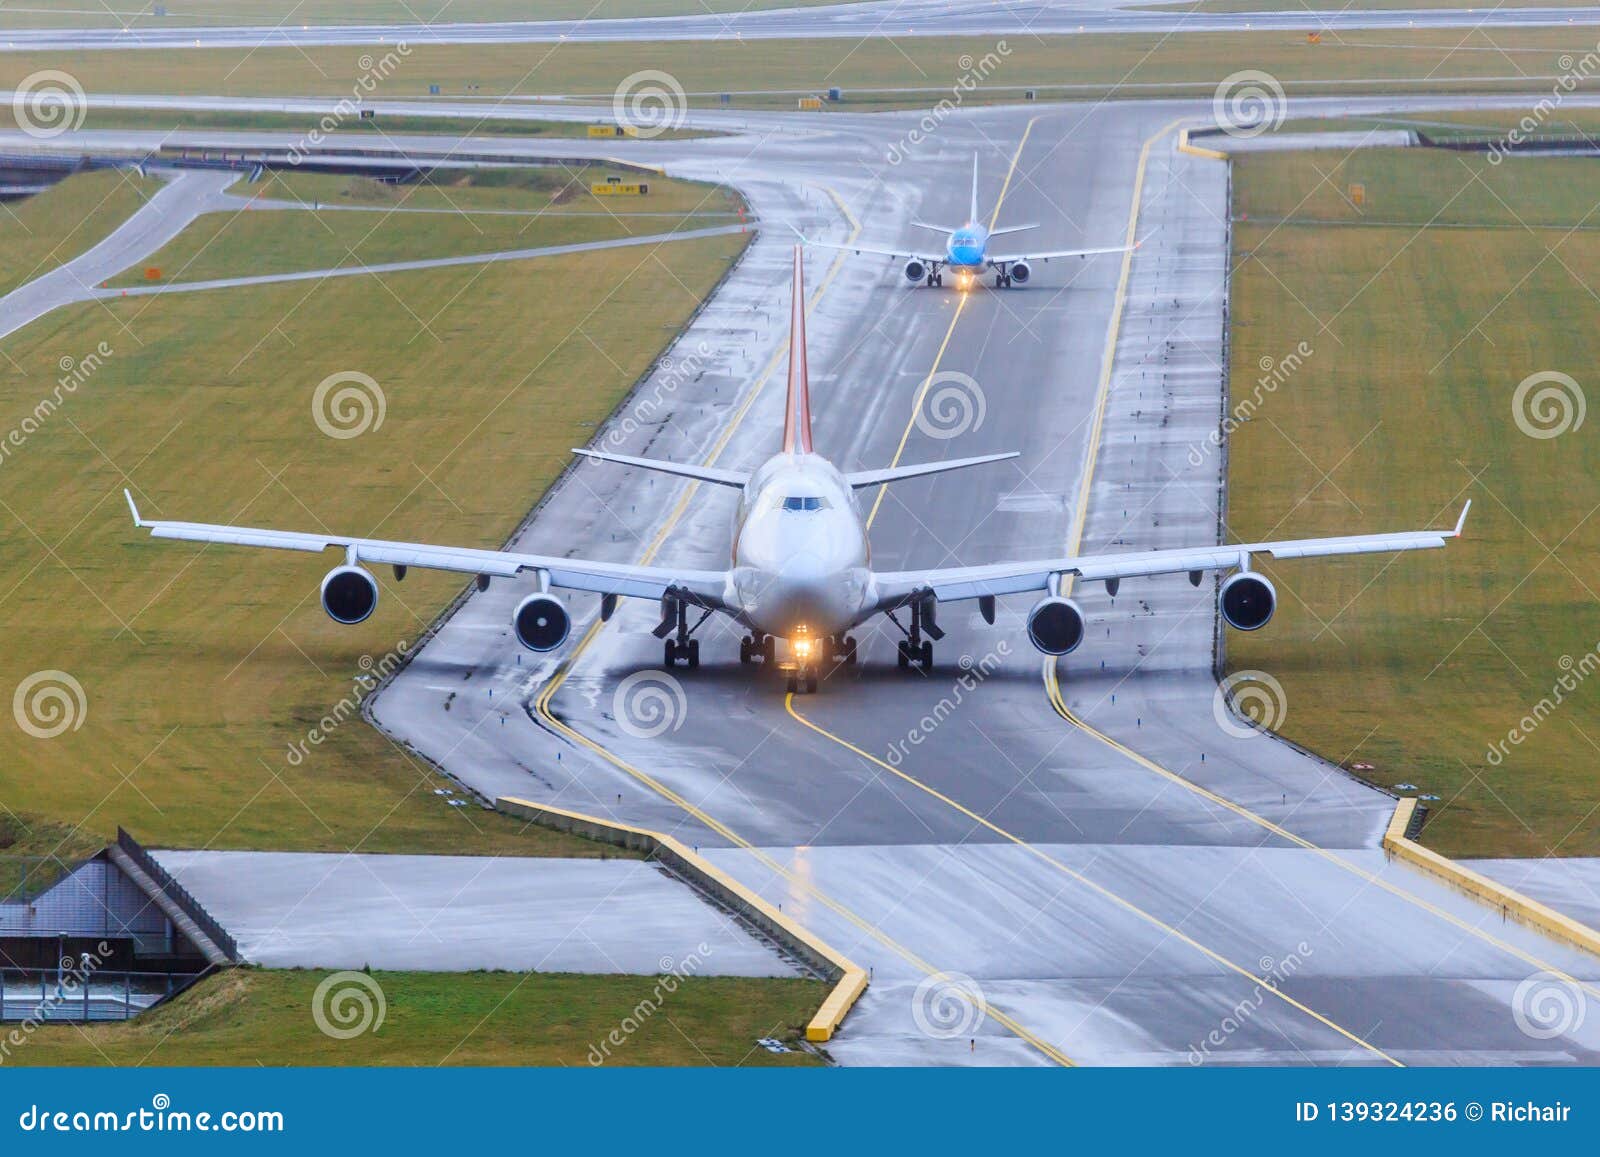 aircraft taxiing on taxiway